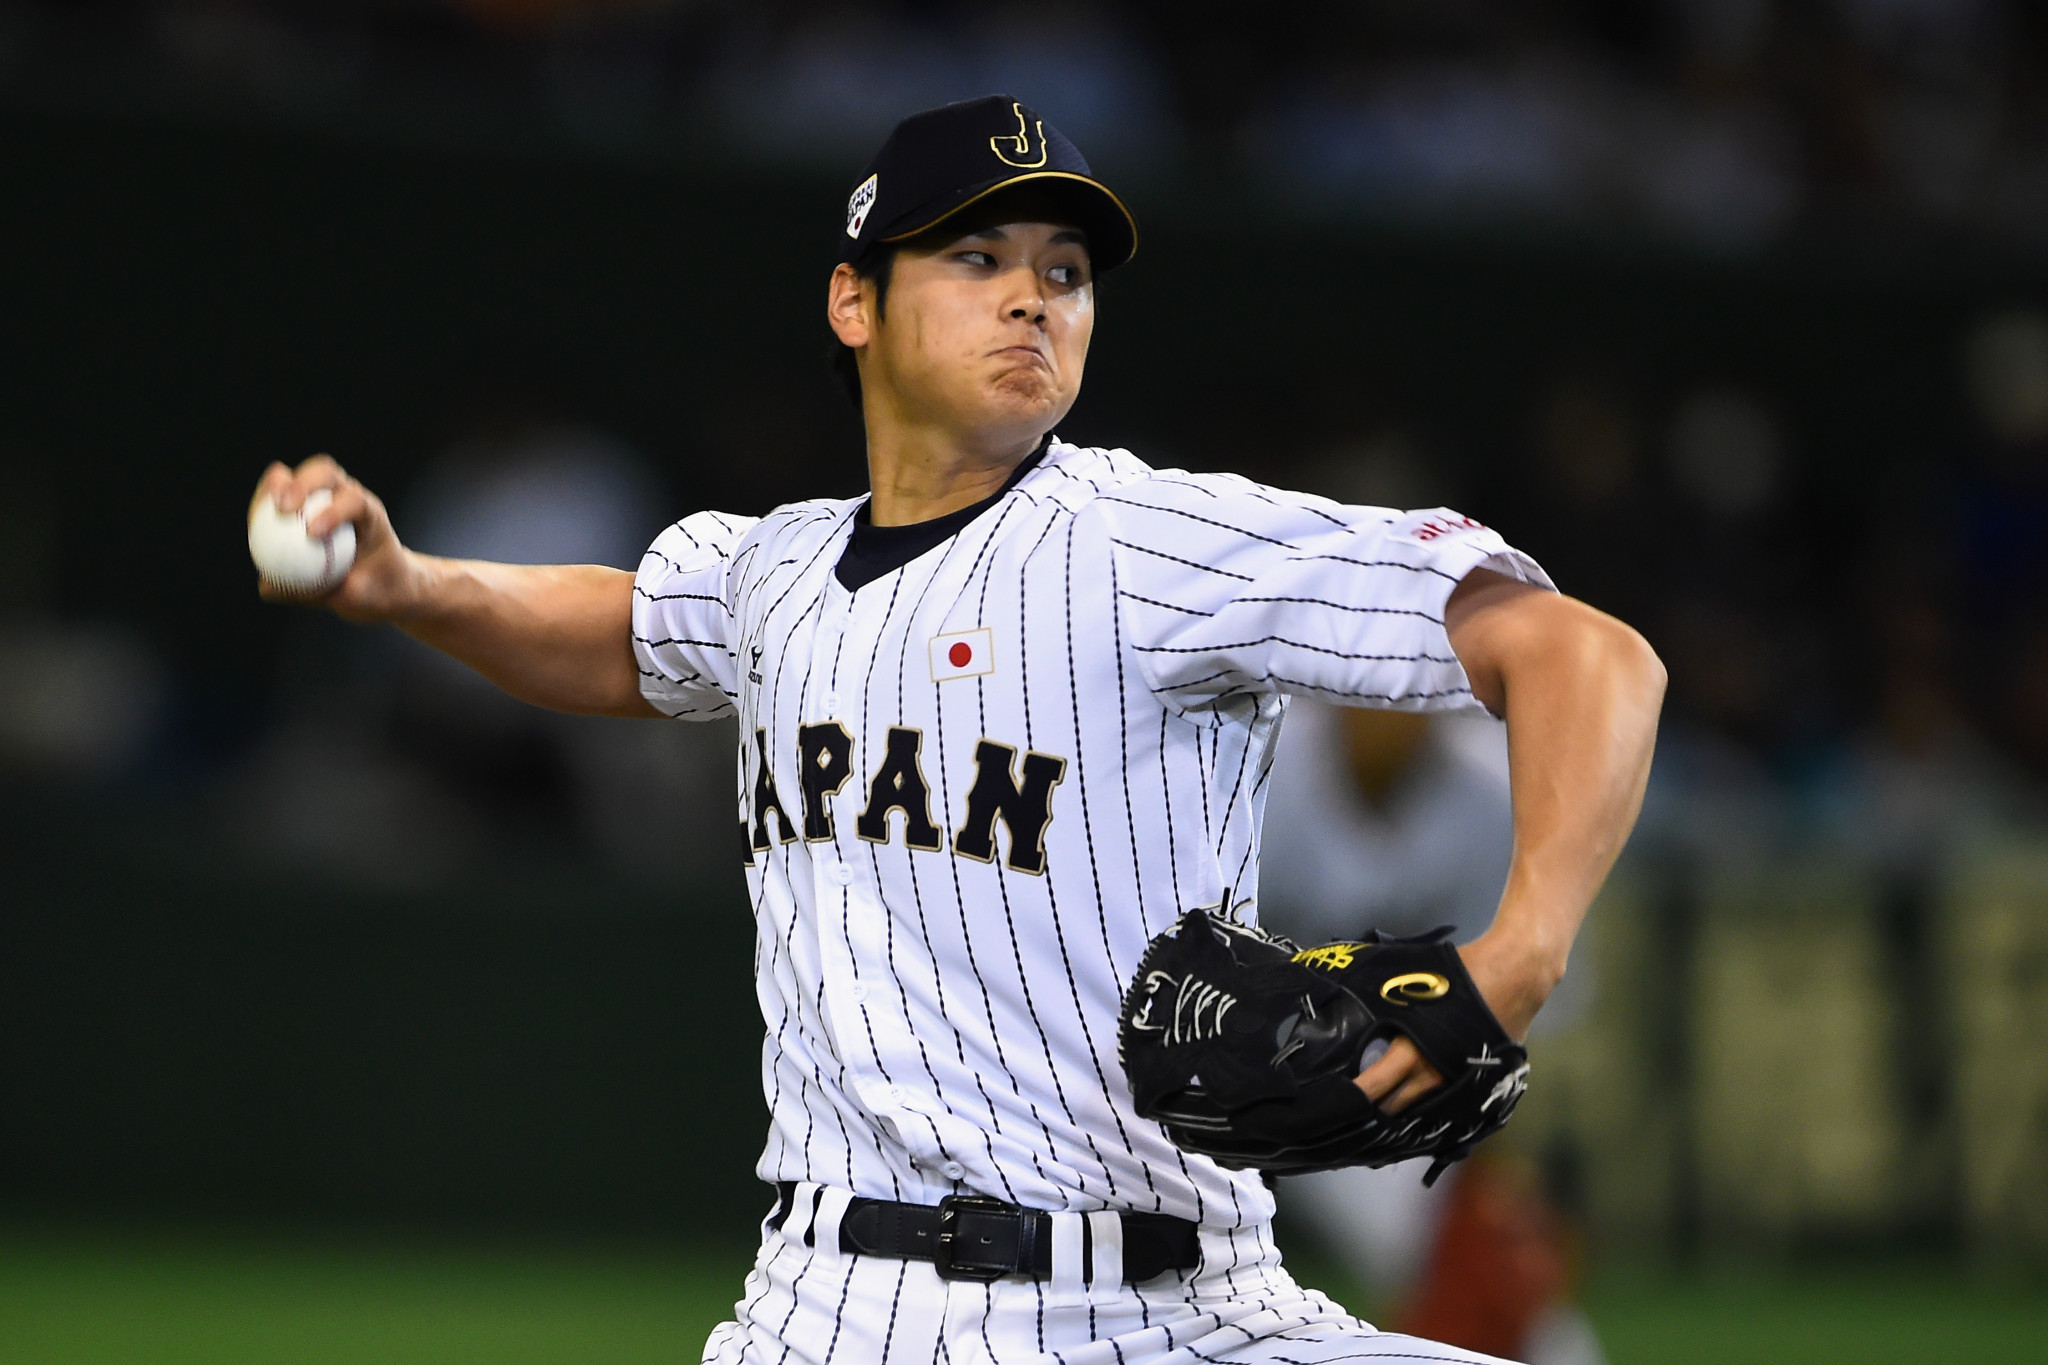 Shohei Ohtani is Japan's star player as the country looks to win a third World Baseball Classic title ©Getty Images